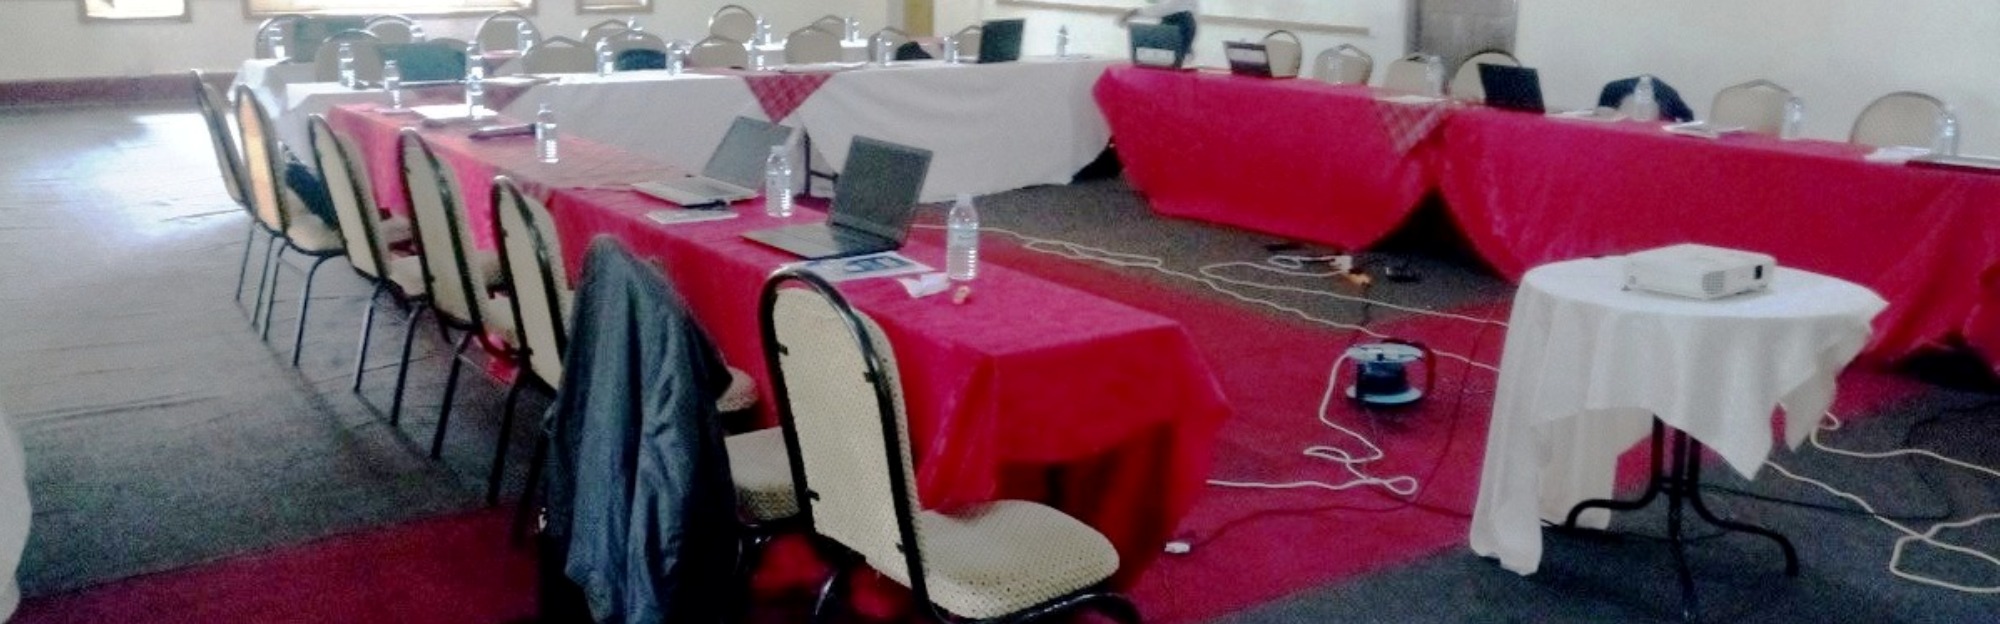 Speke Courts Hotel Conferences & Weddings